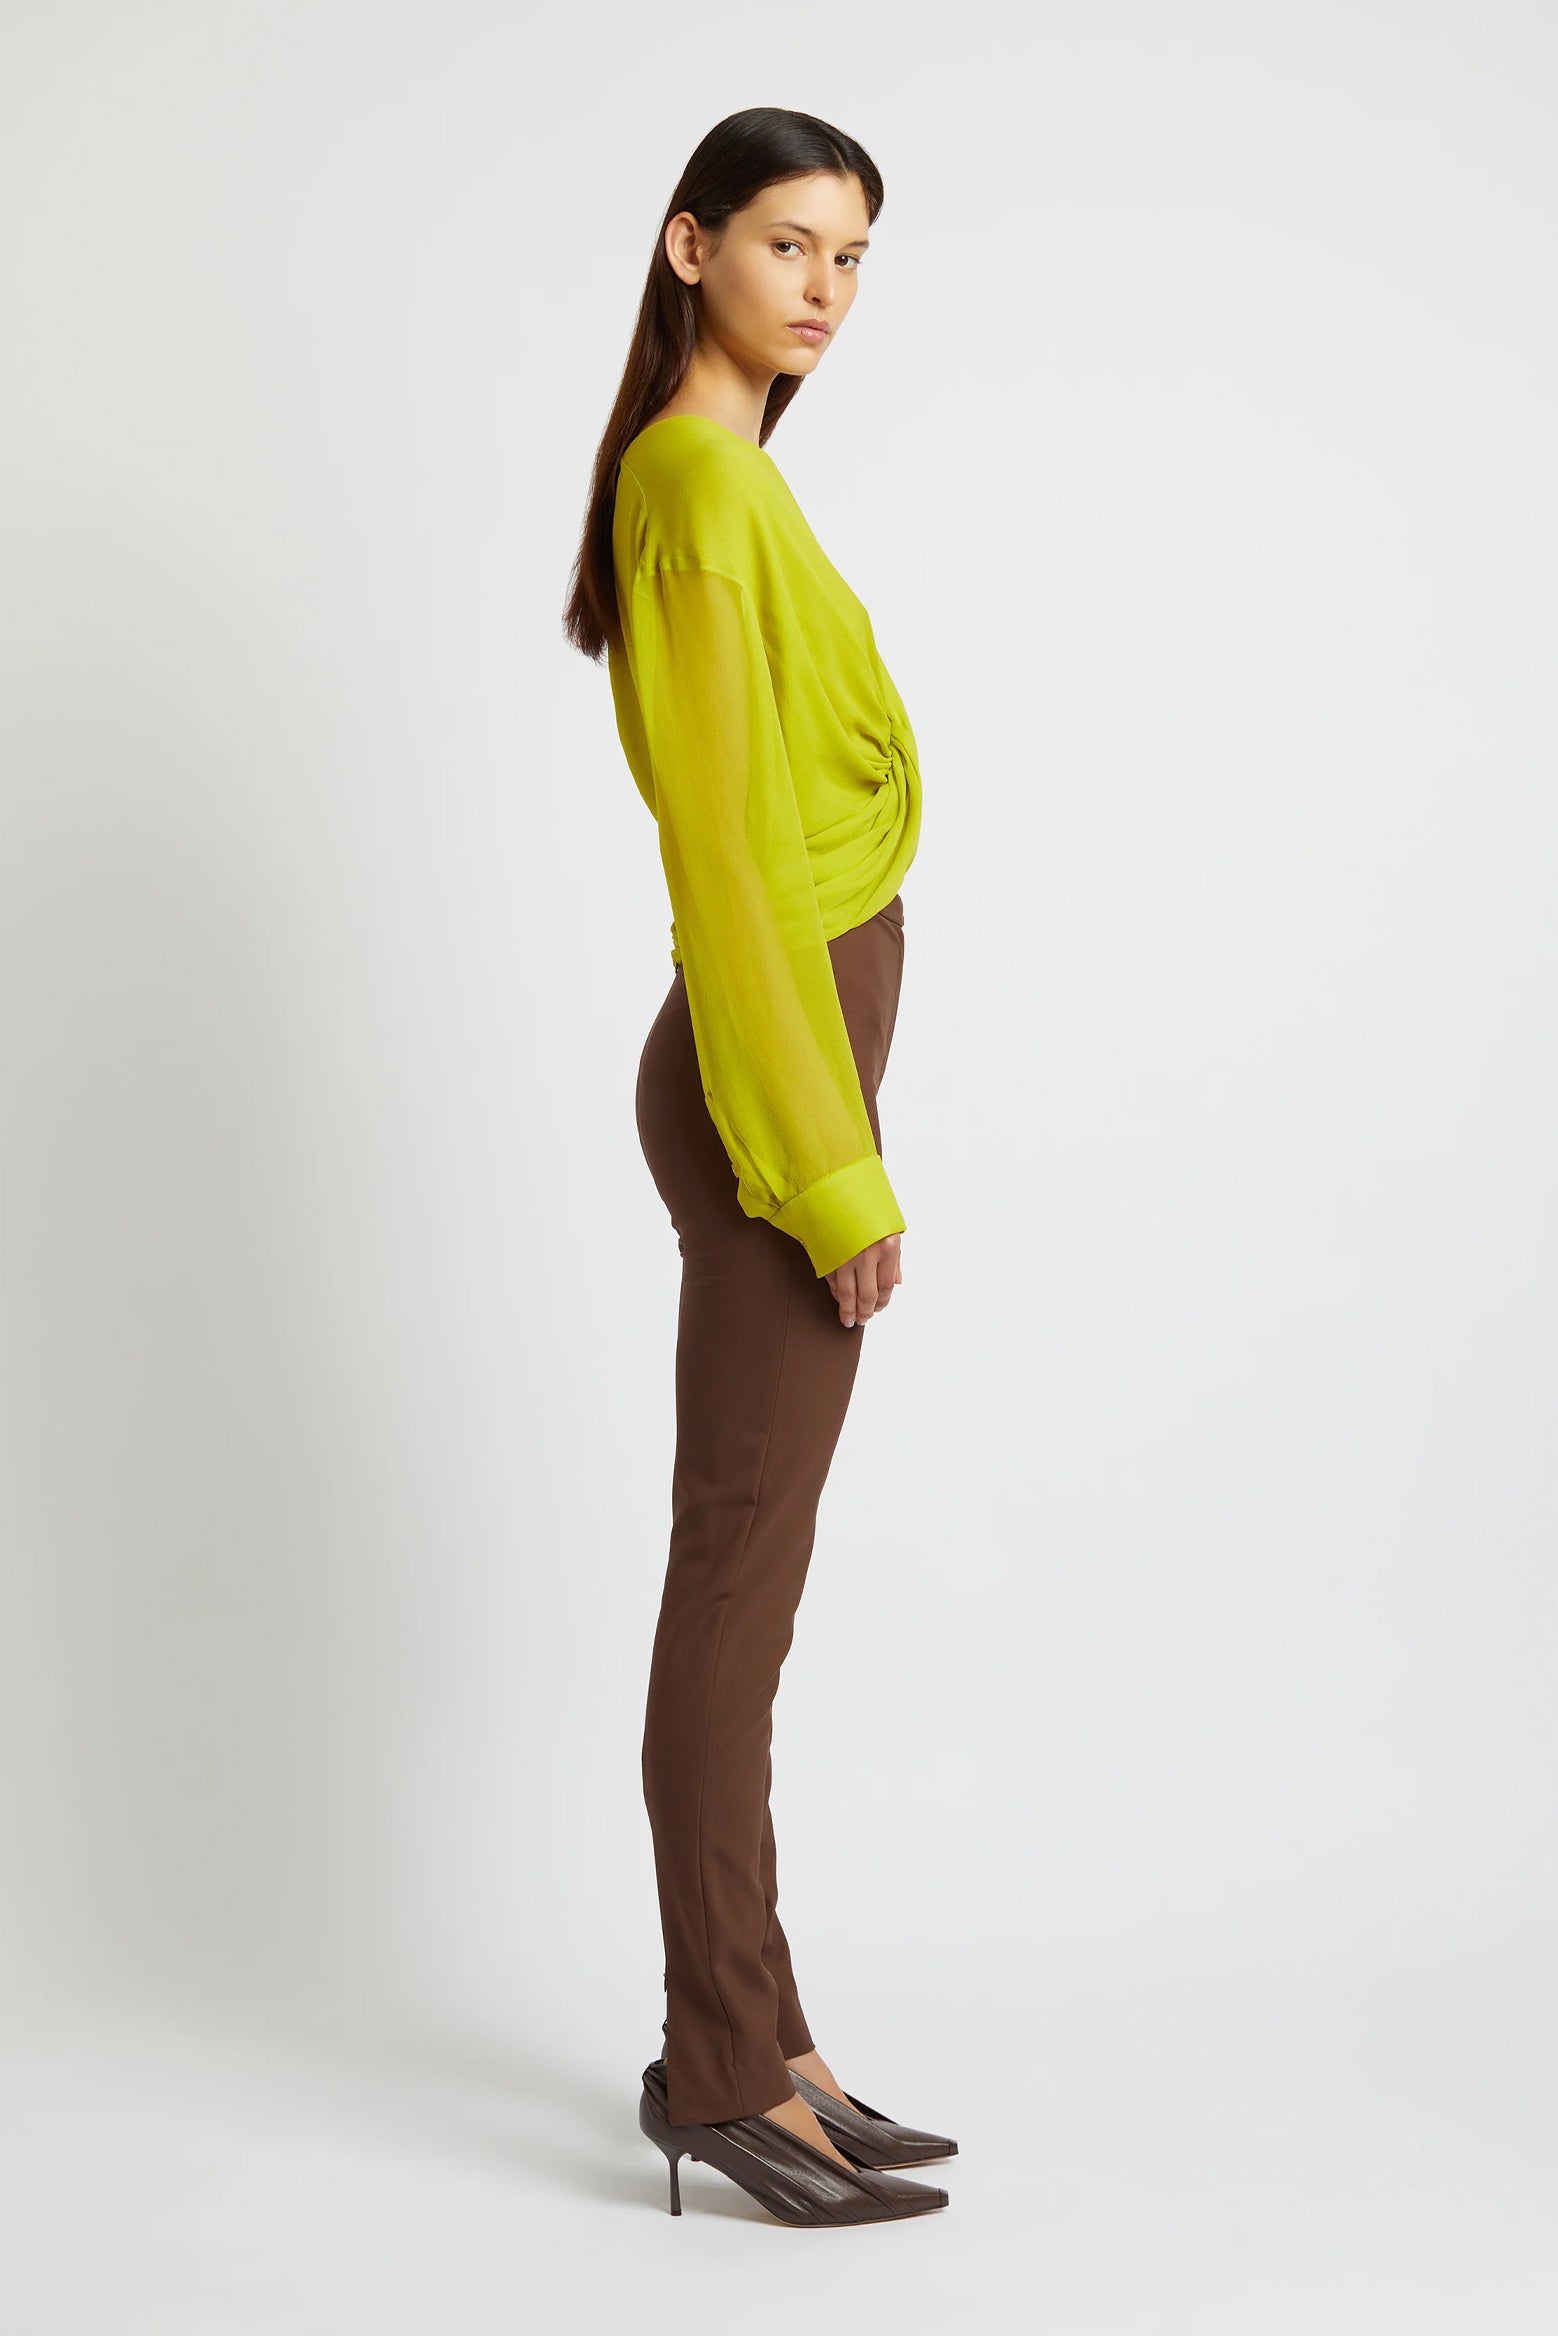 Christopher Esber Silk Springs Twist Front Top in Limade available at The New Trend Australia.